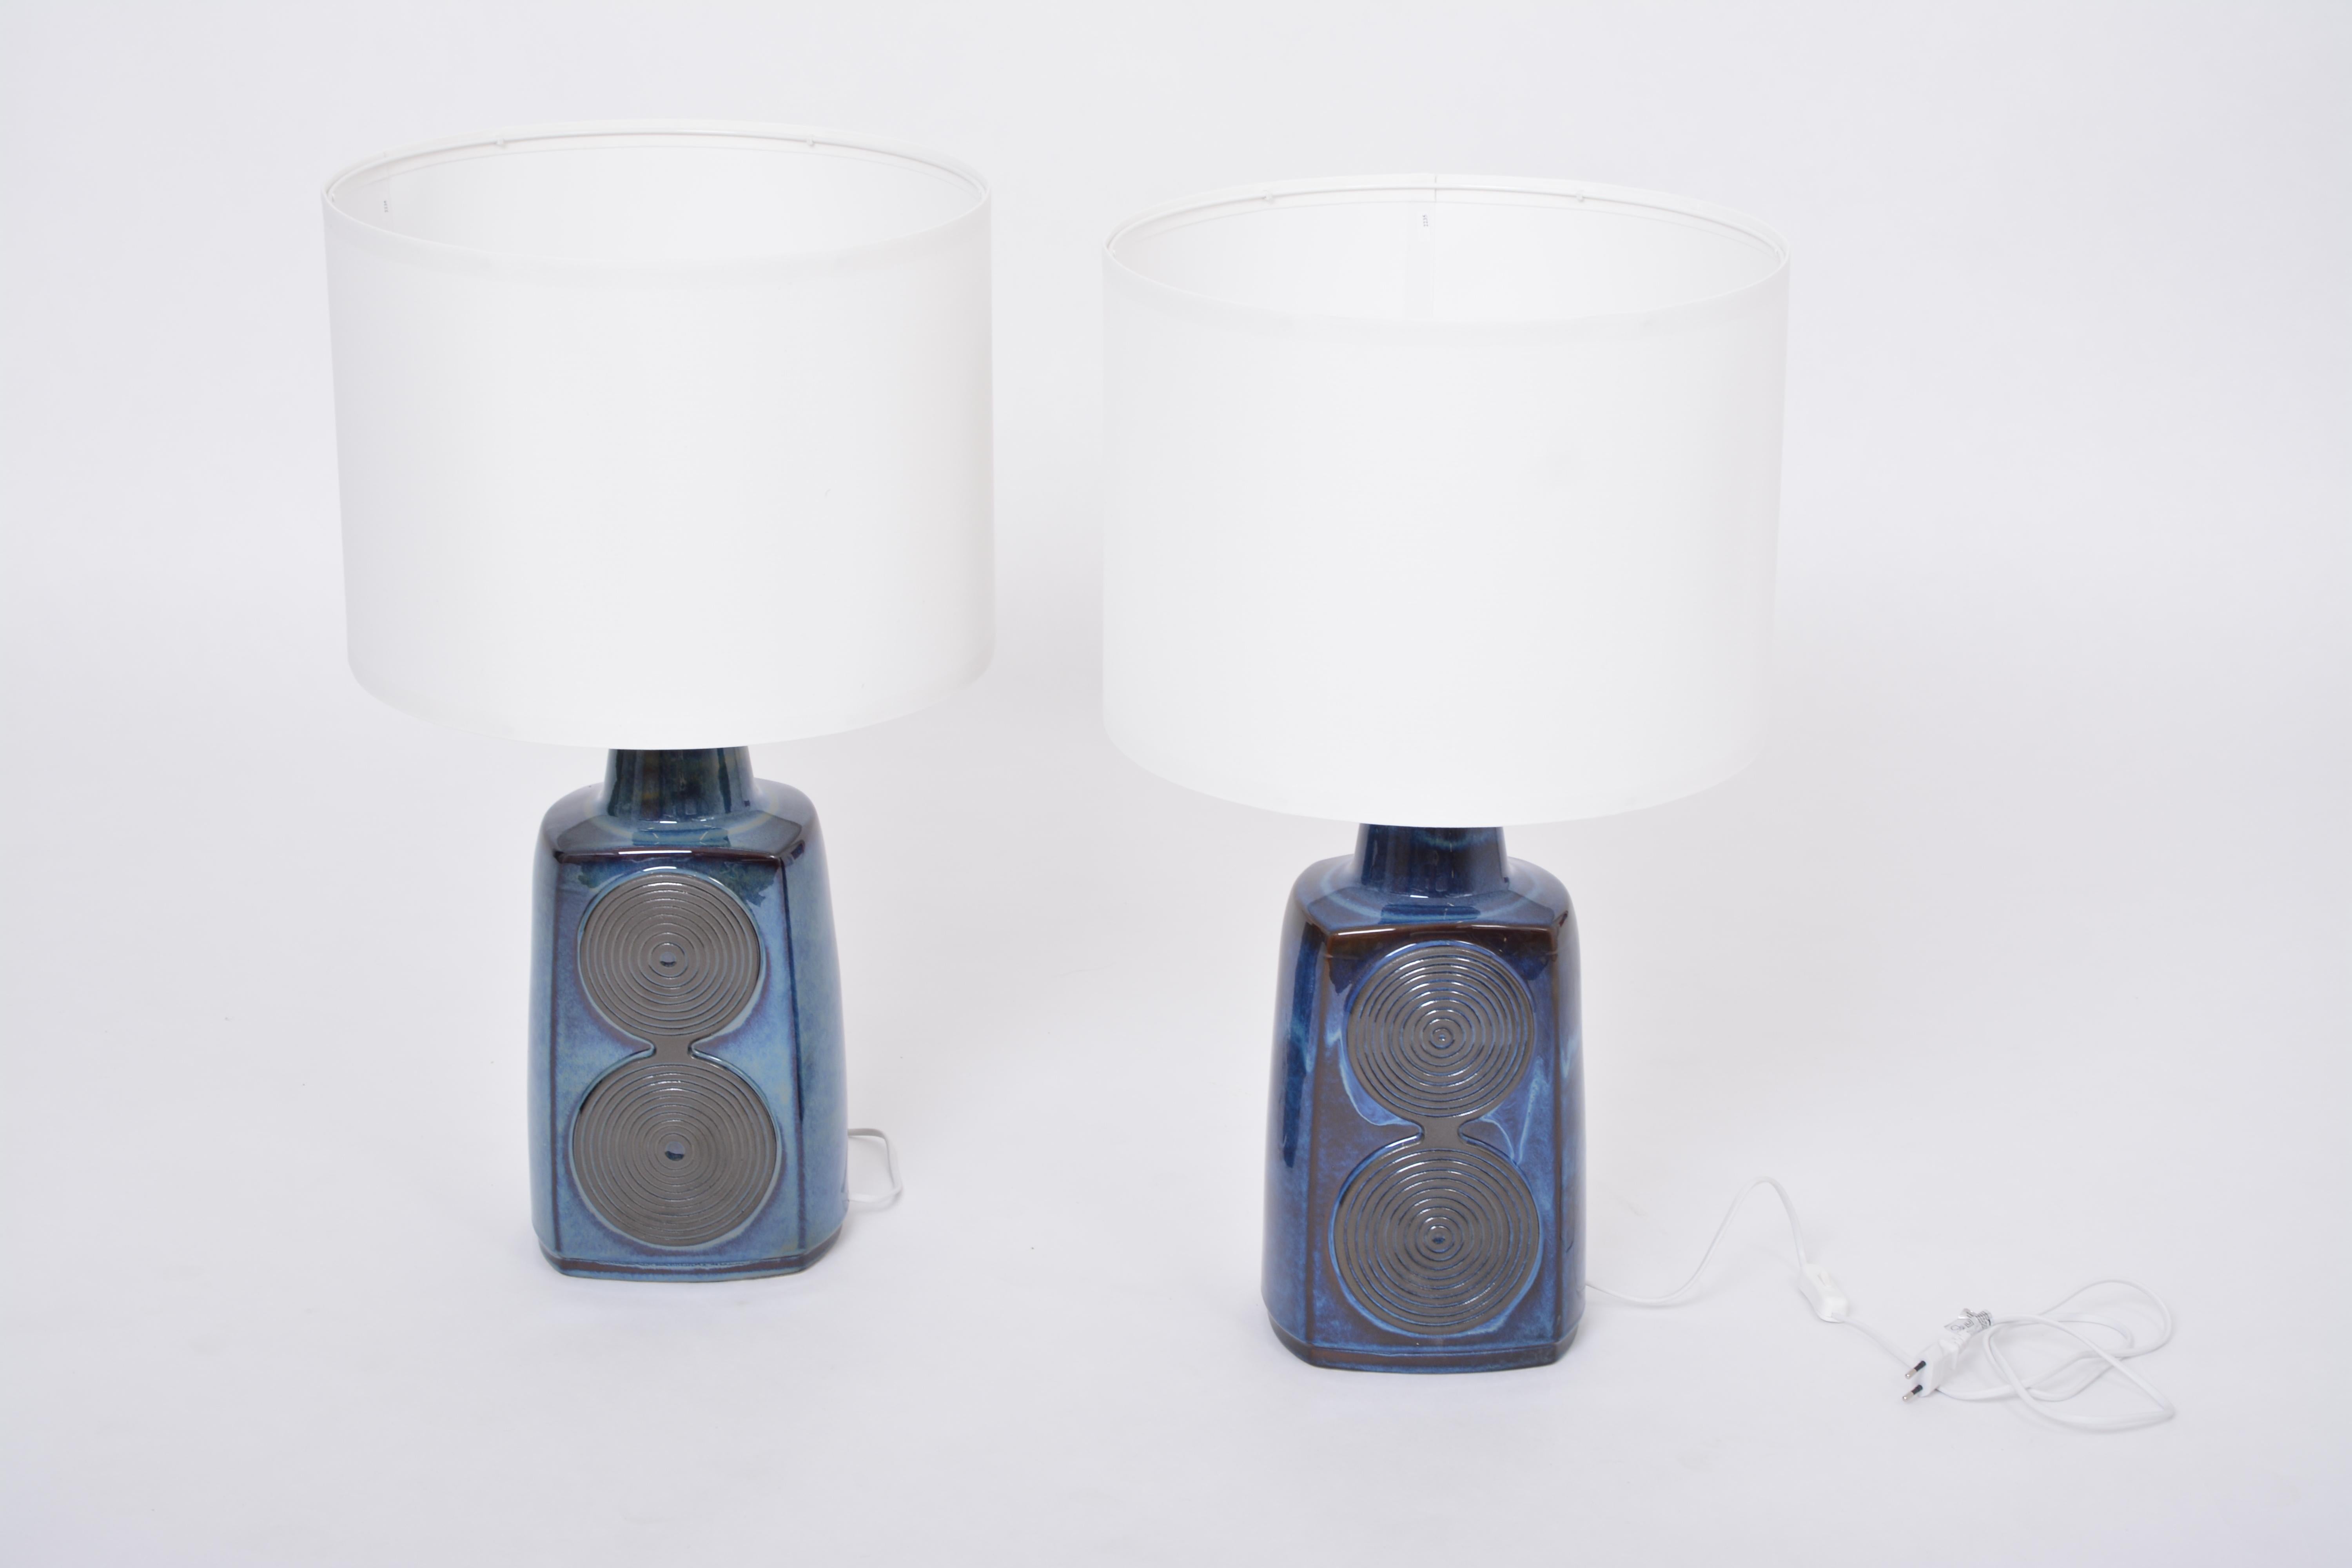 Pair of tall blue midcentury table lamps model 3461 by Einar Johansen for Soholm
These table lamps were originally vases that have been converted into spectacular and impressive table lamps. Einar Johansen designed these vases for Danish company